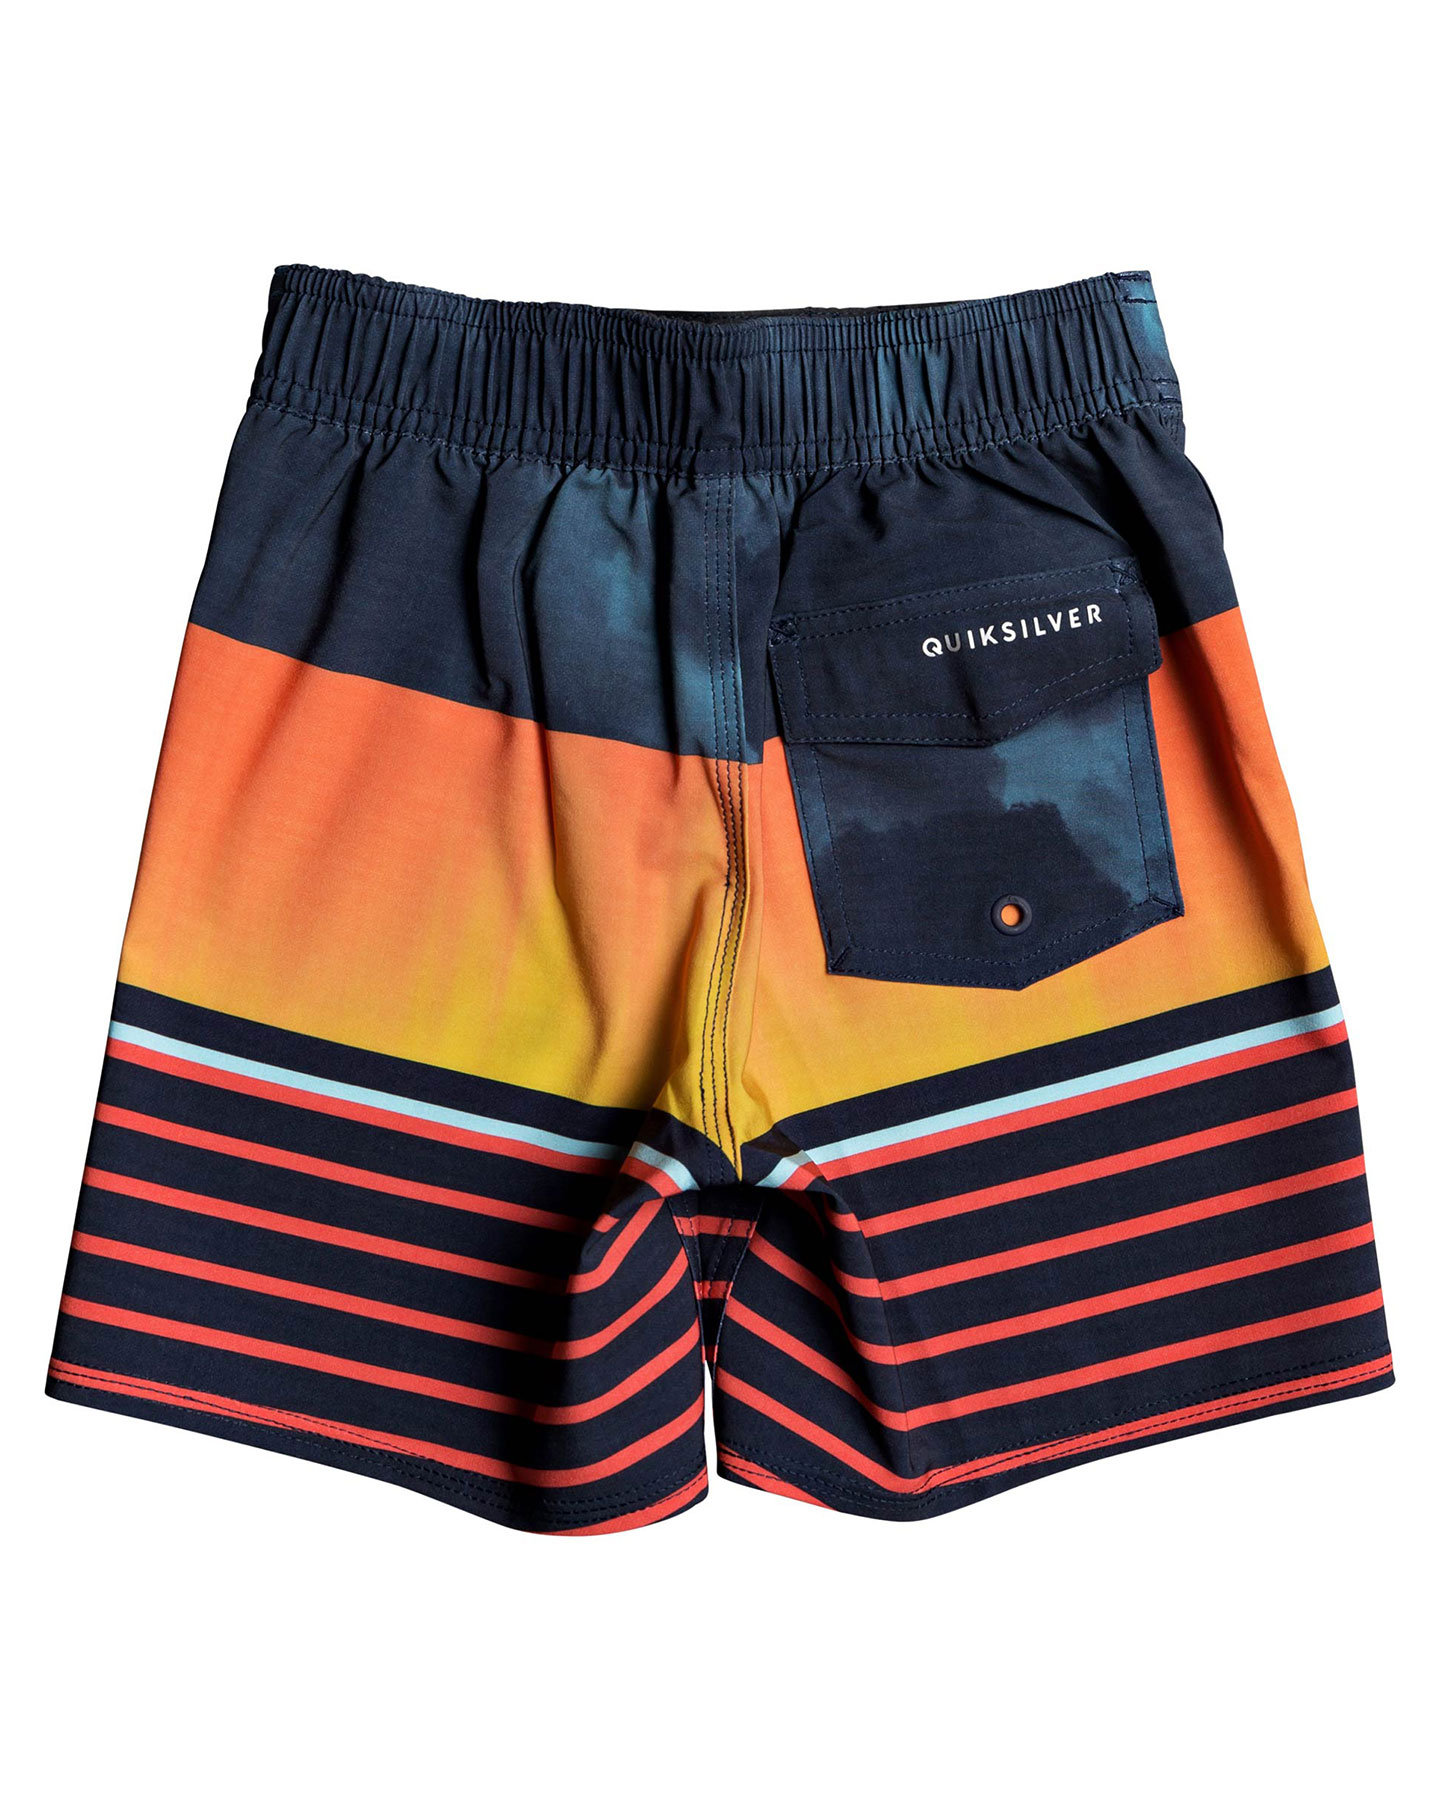 Quiksilver Boys 2-7 Highline Swell Vision 12